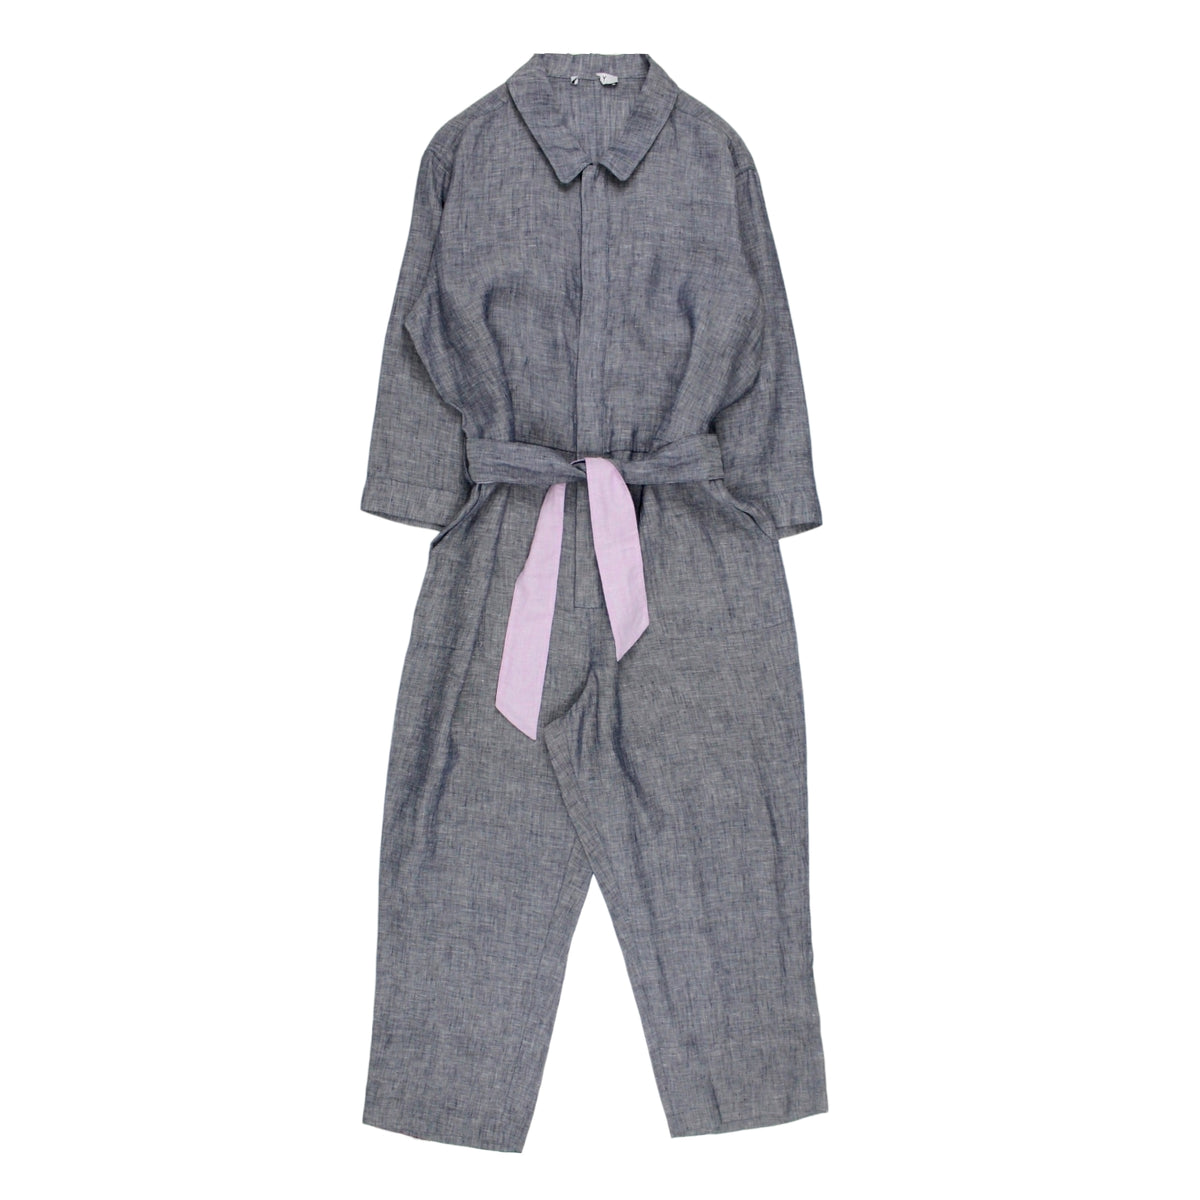 NRBY Navy Chambray Linen Jumpsuit - Sample